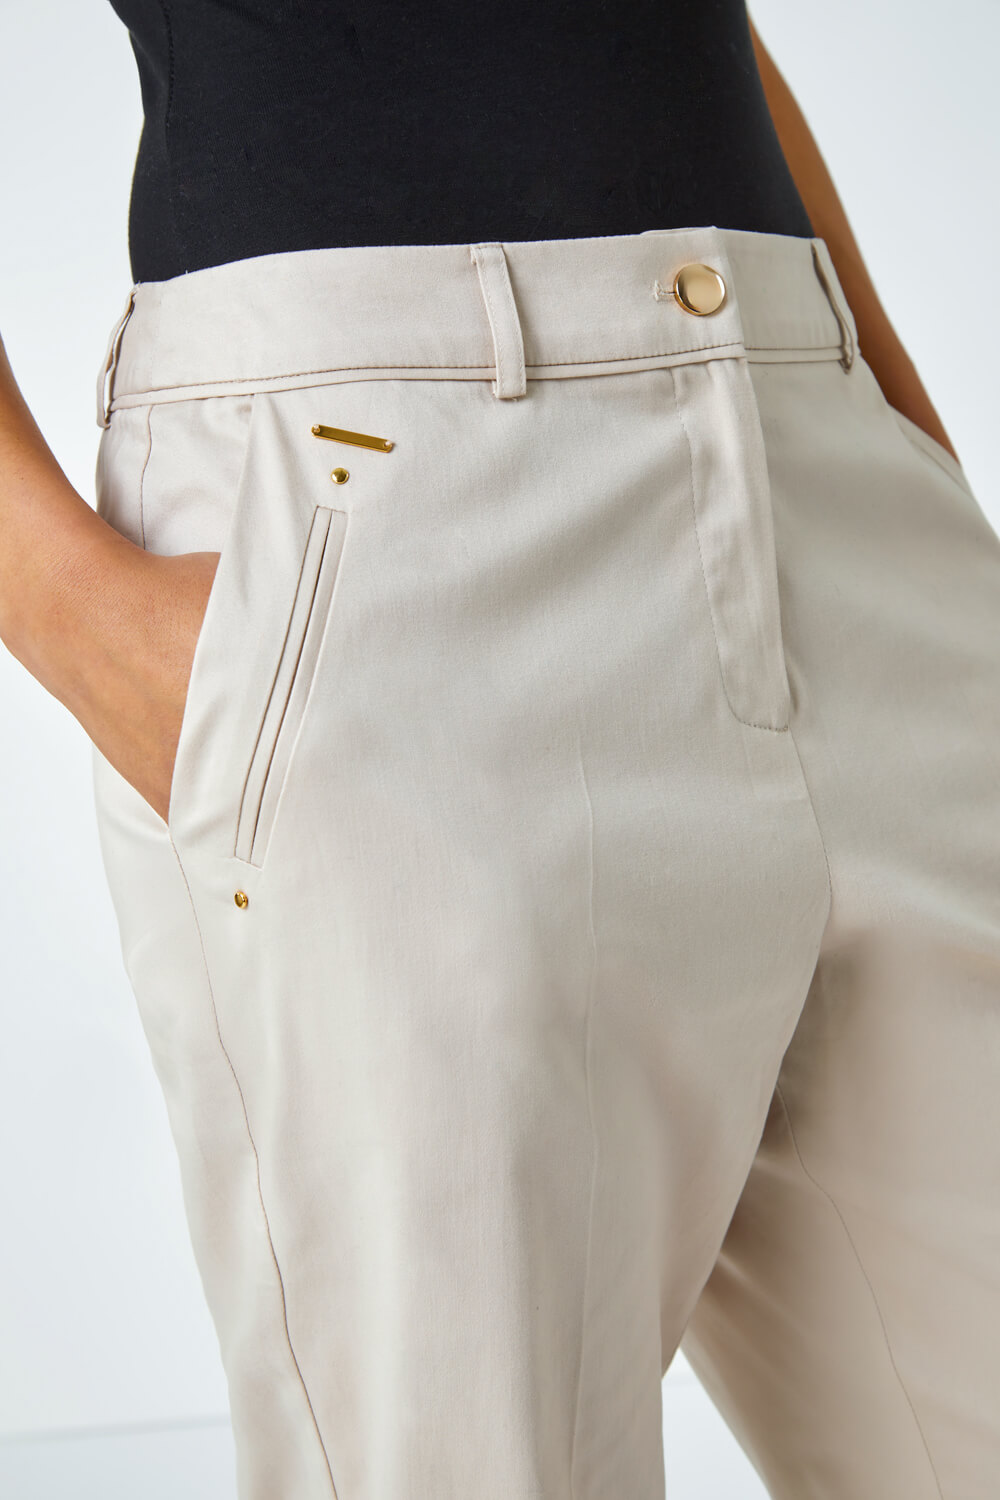 Stone Petite Cotton Blend Stretch Trousers, Image 5 of 5